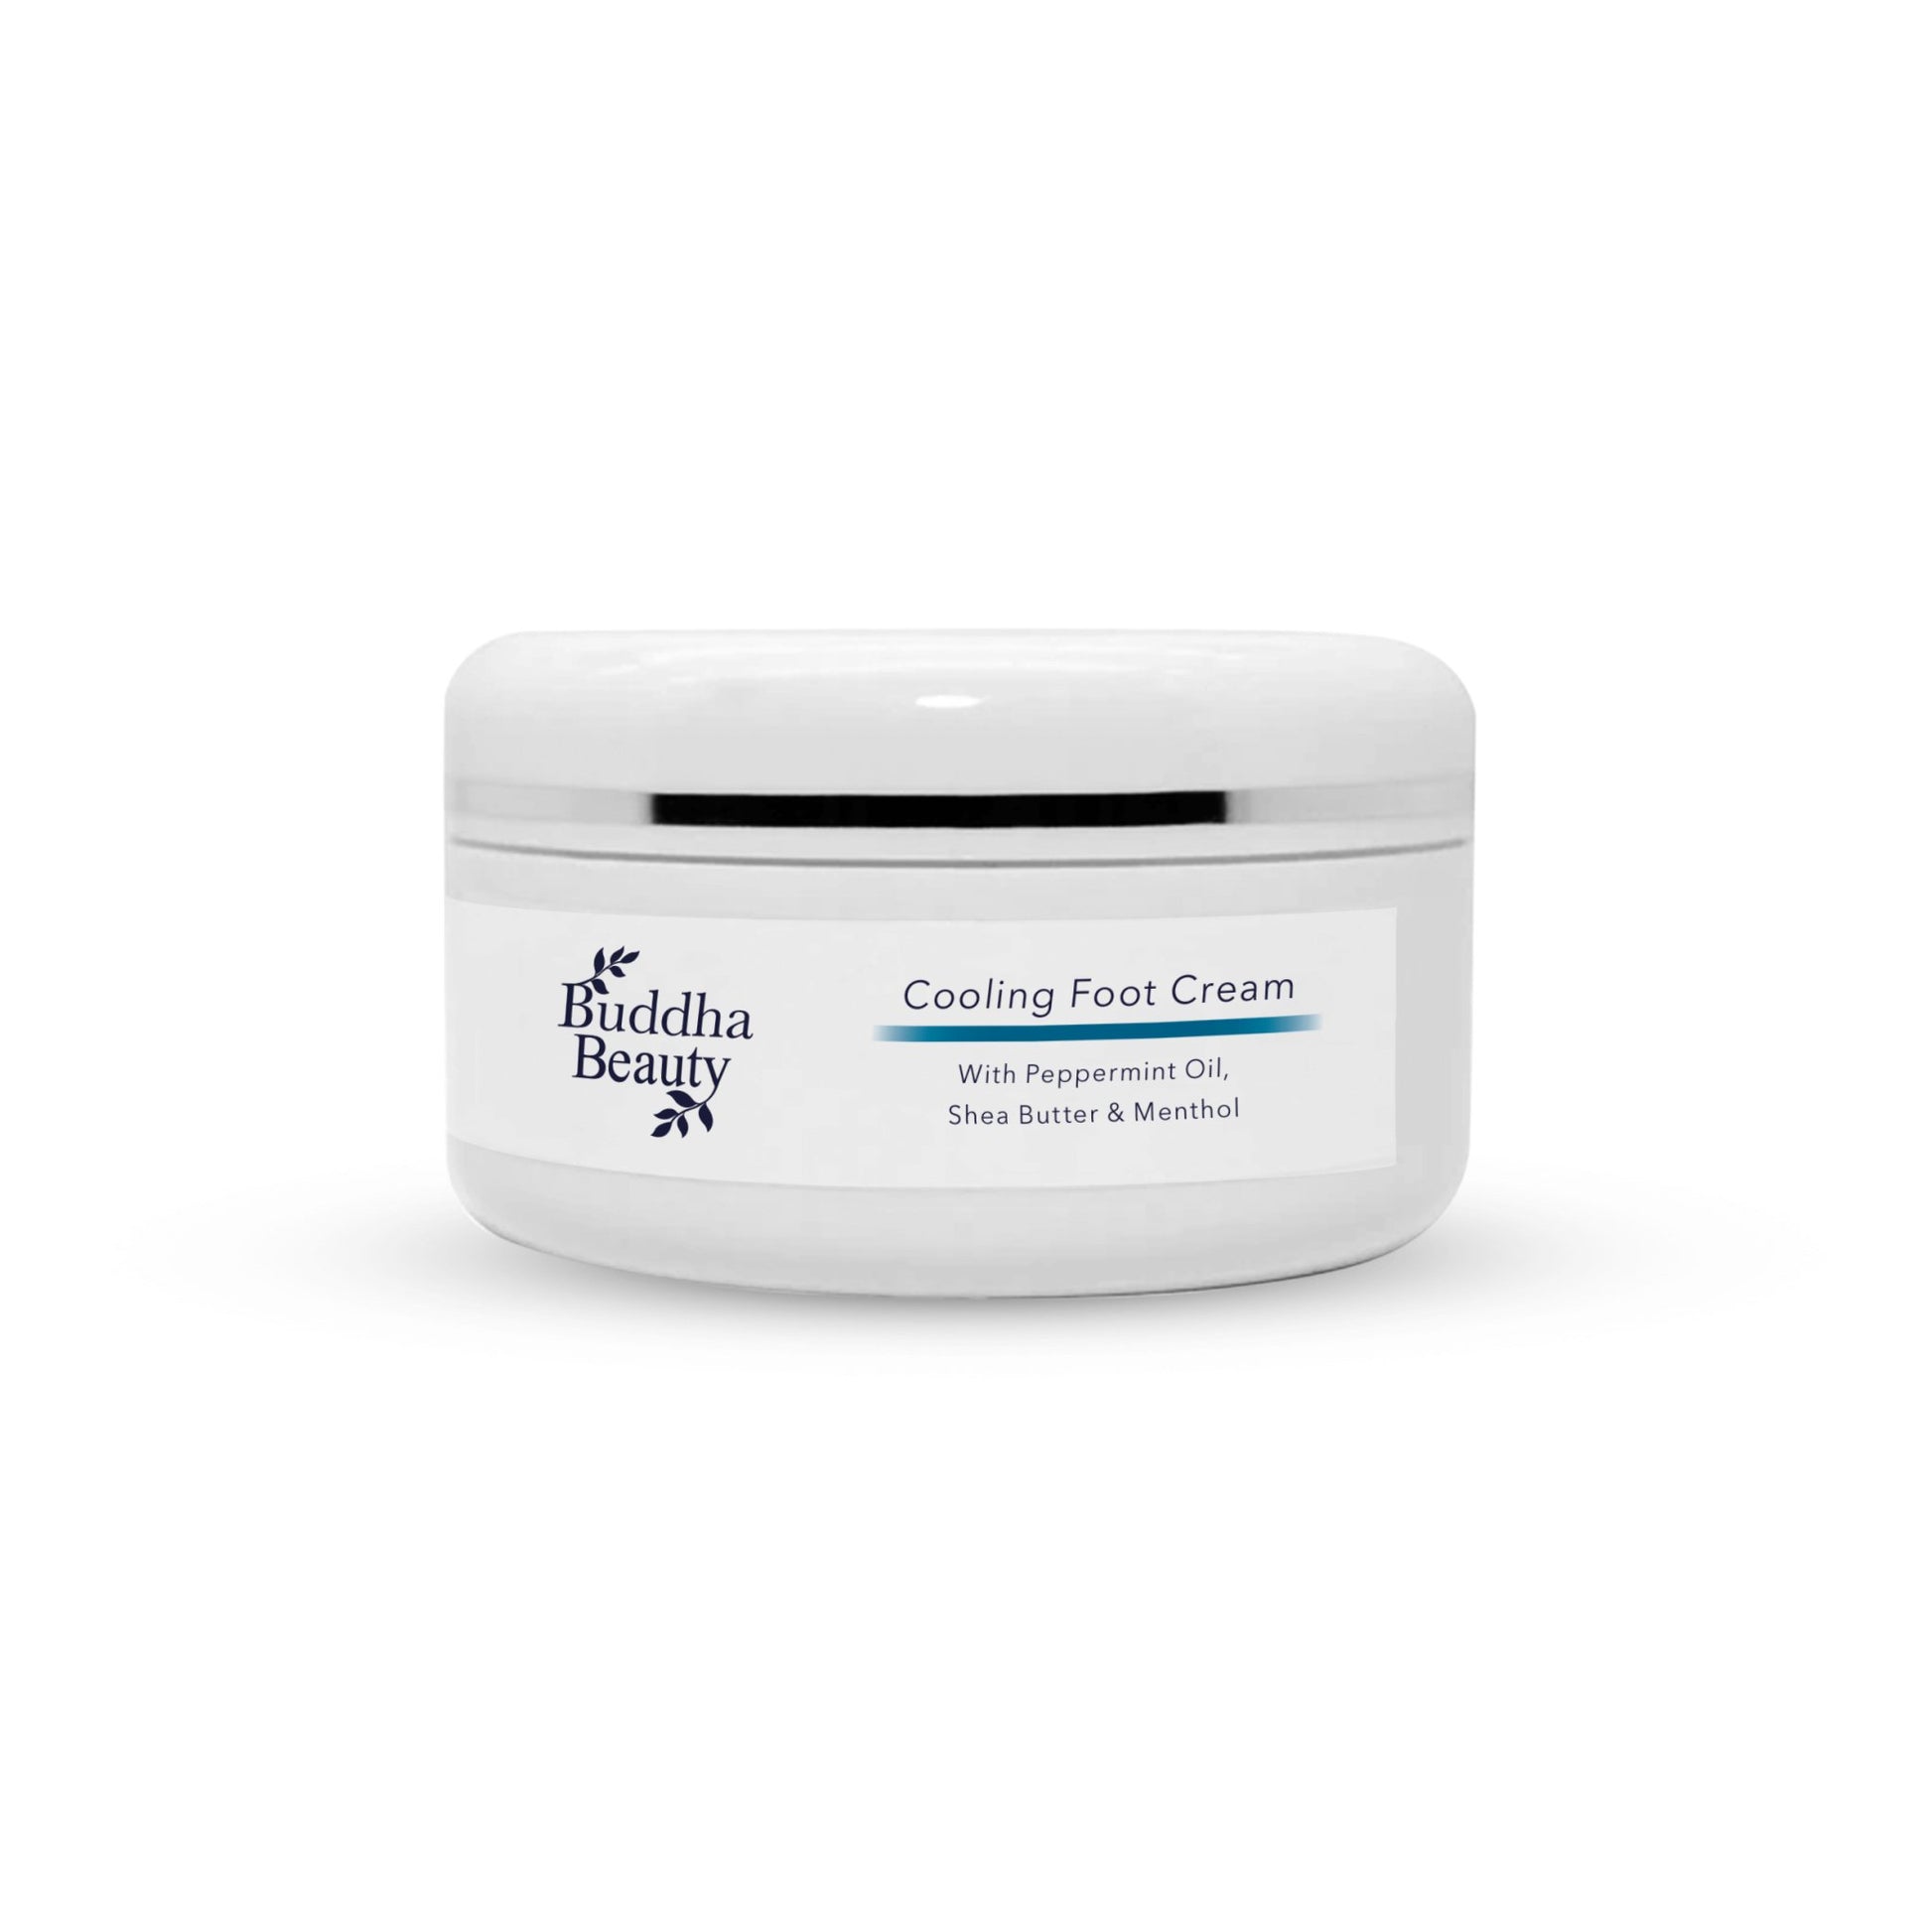 Cooling Foot Cream With Peppermint - Buddha Beauty Skincare Foot Cream #vegan# #cruelty-free# #skincare#